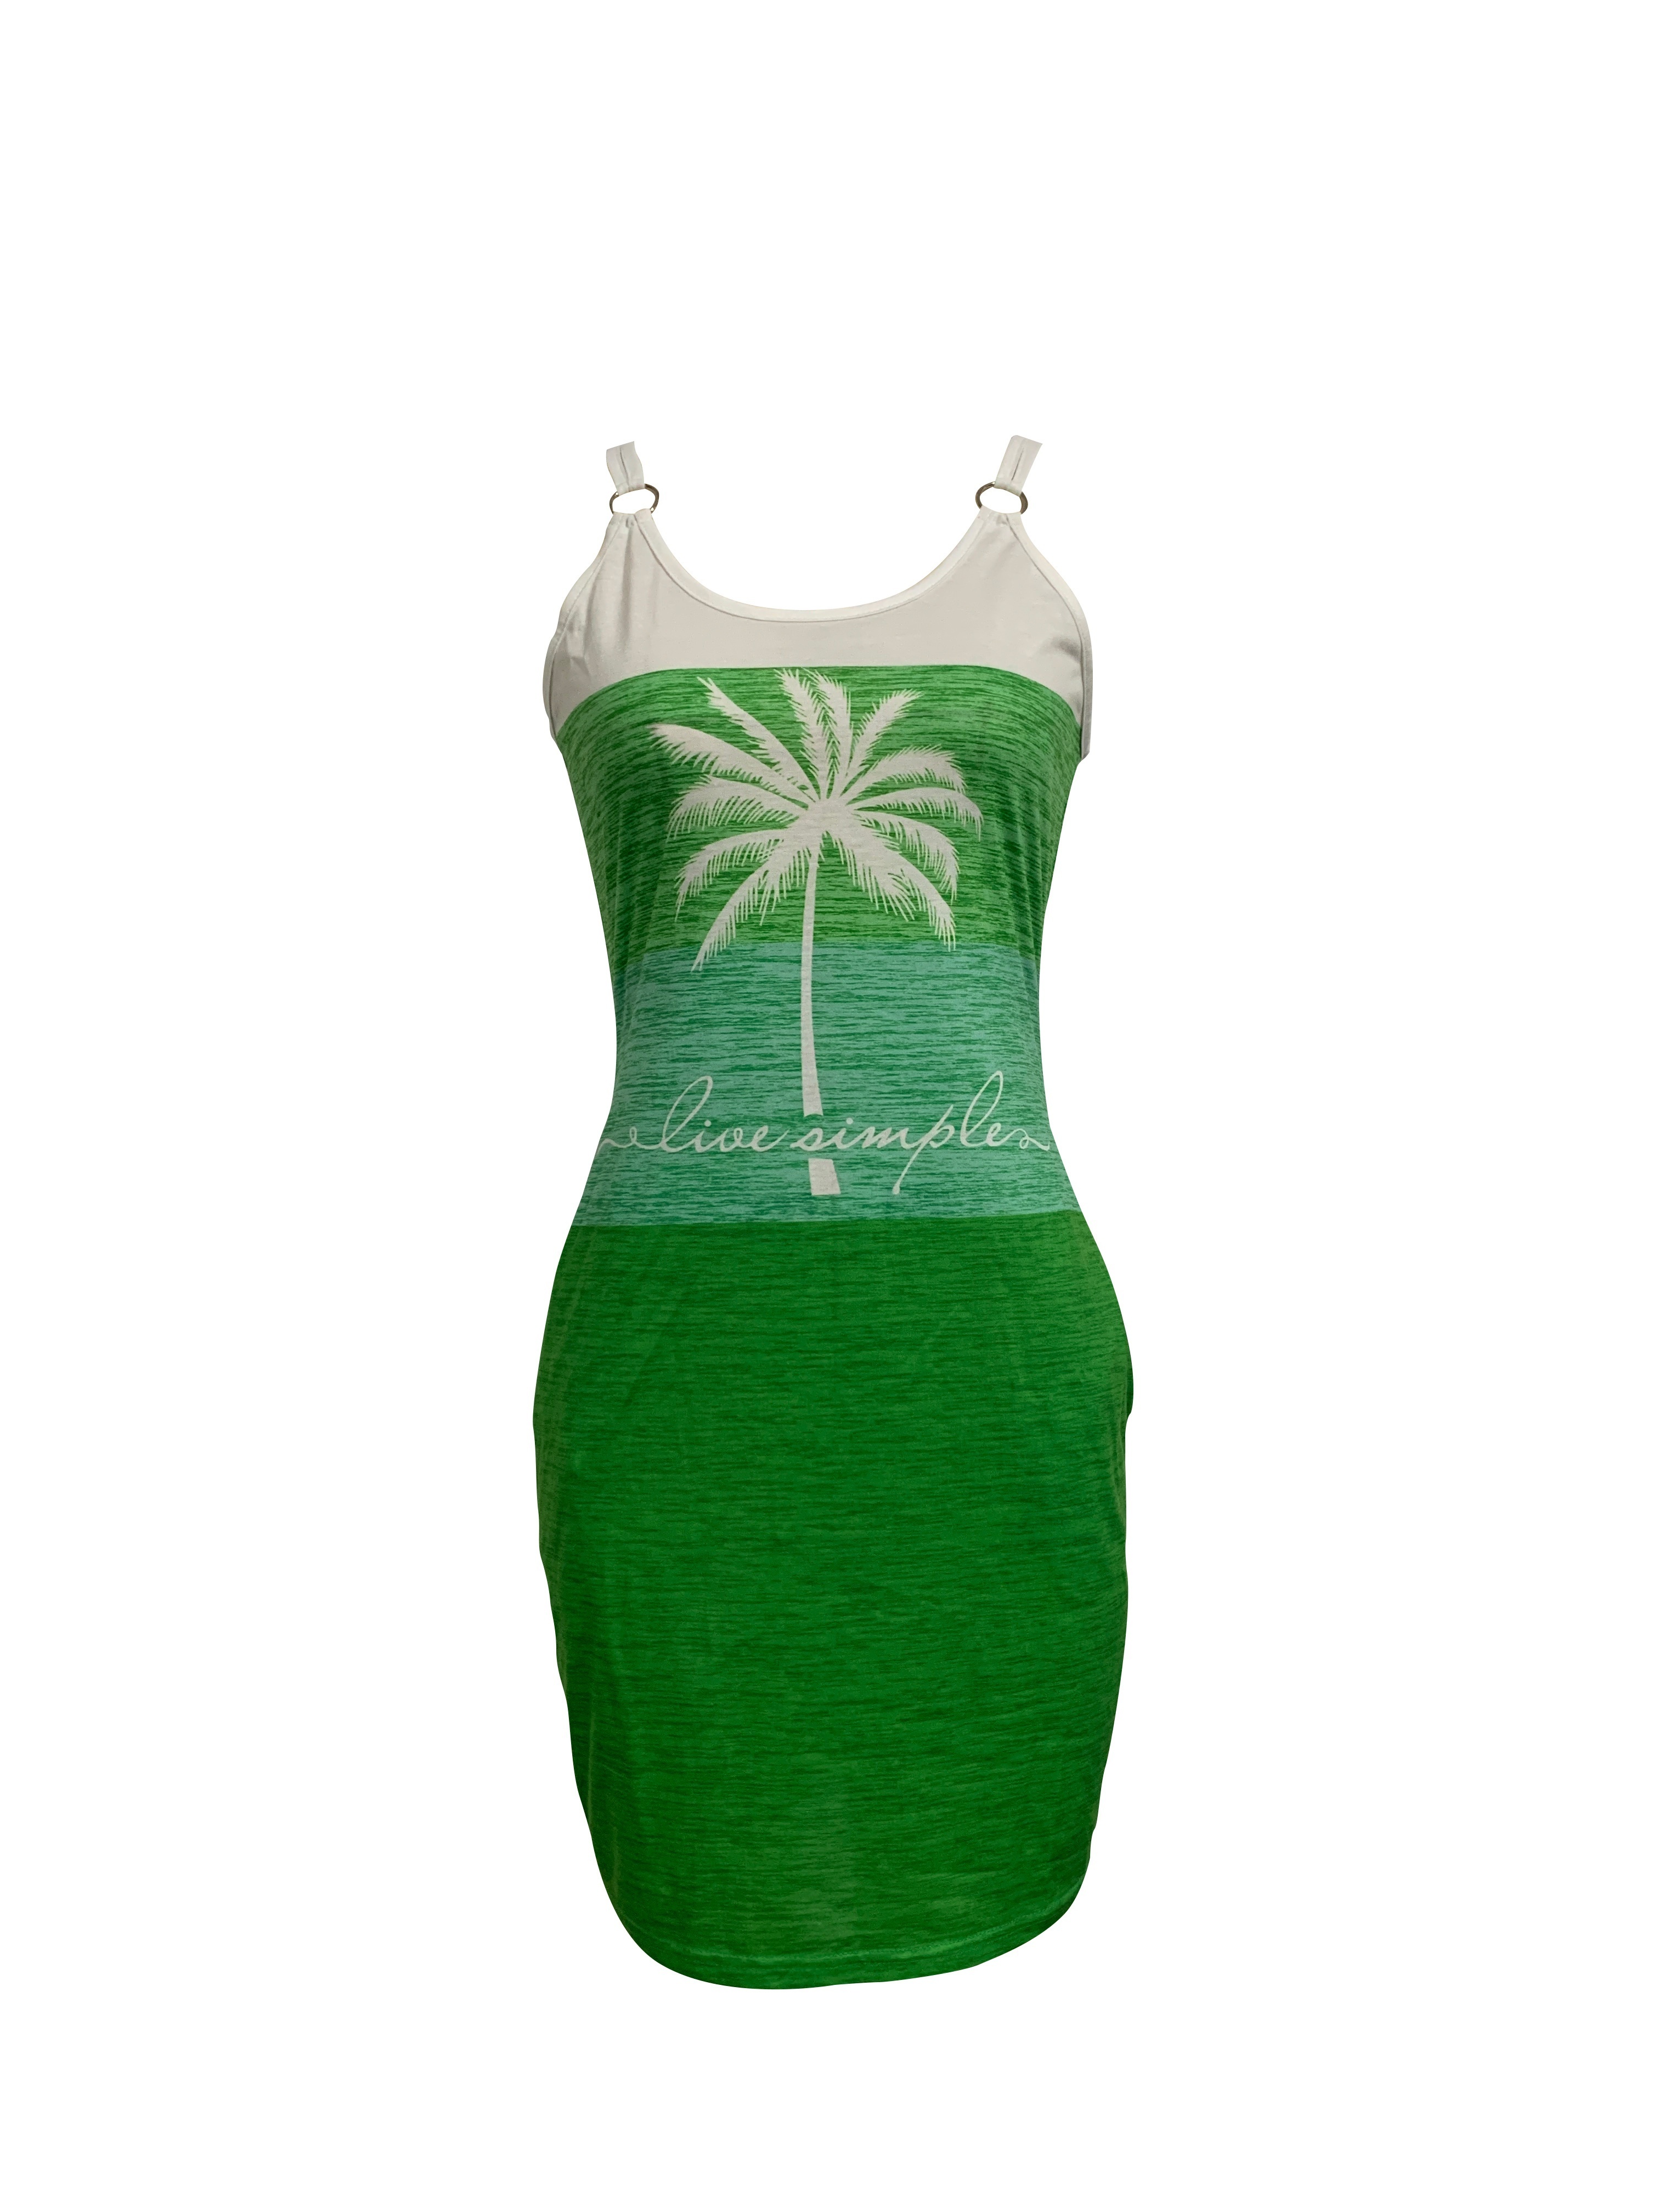 coconut tree print dress vacation ring linked sleeveless color block dress womens clothing details 10